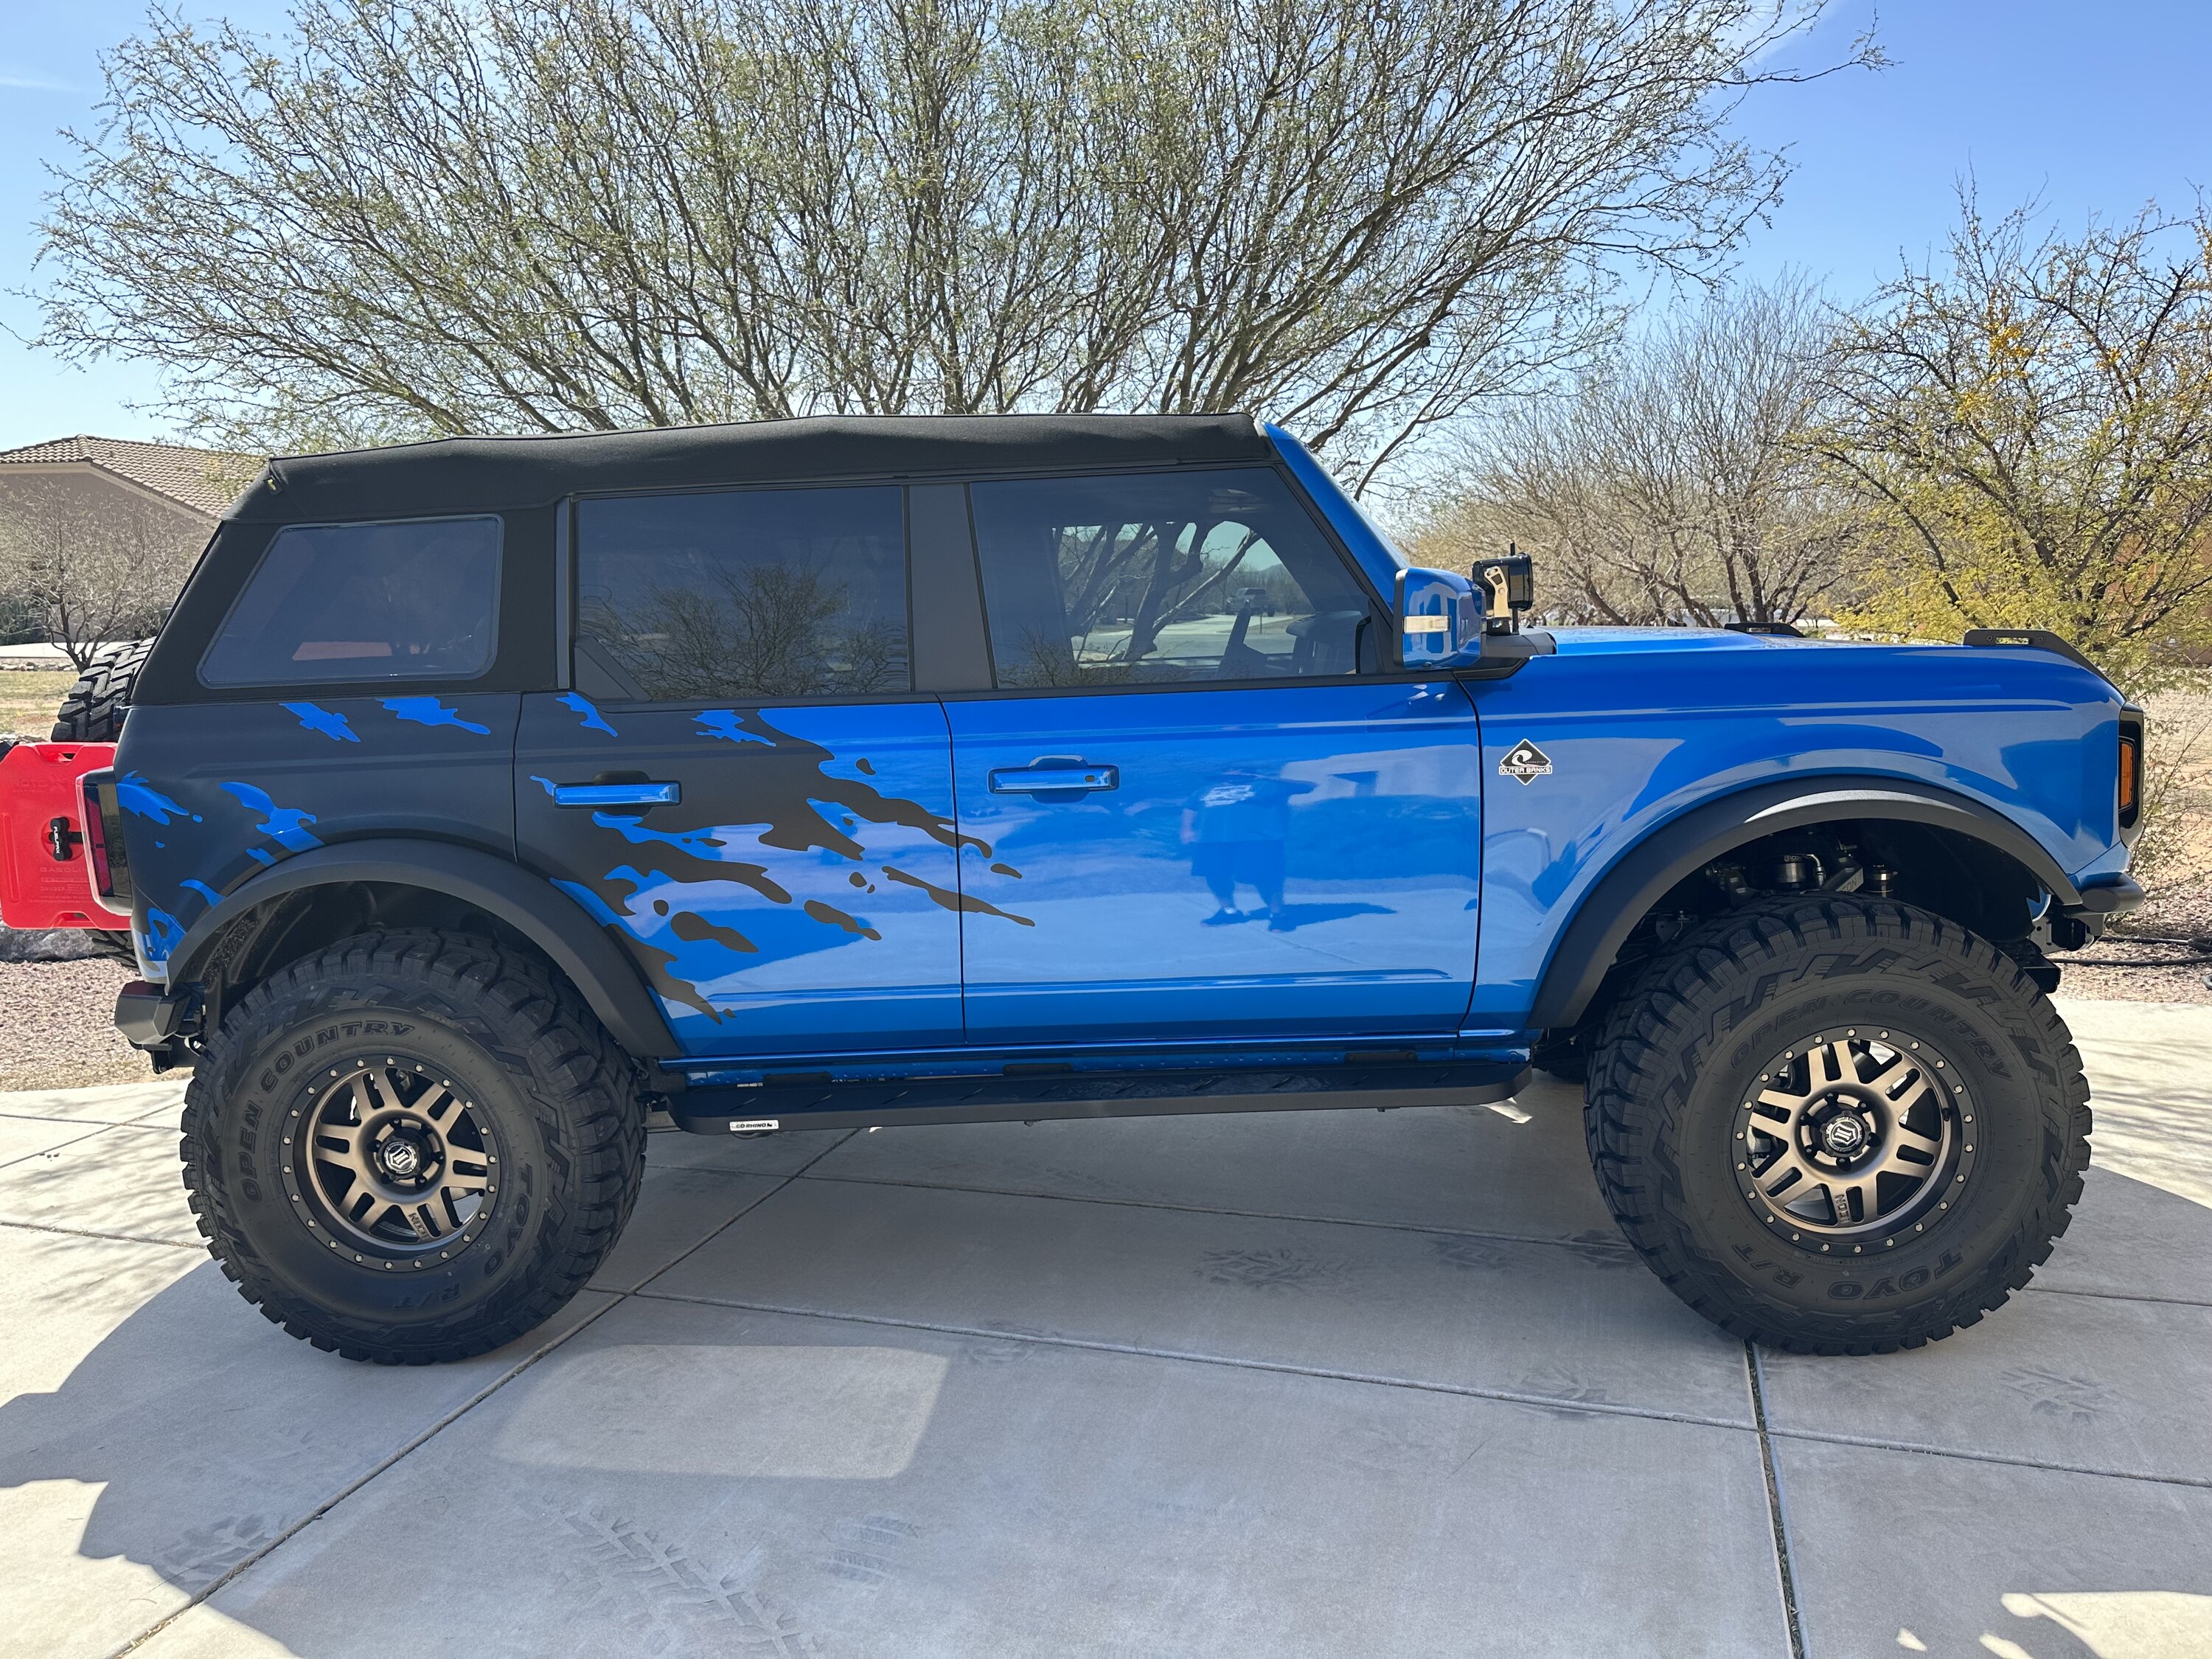 Ford Bronco Before & After Photos. Let's See Your Bronco! IMG_1723